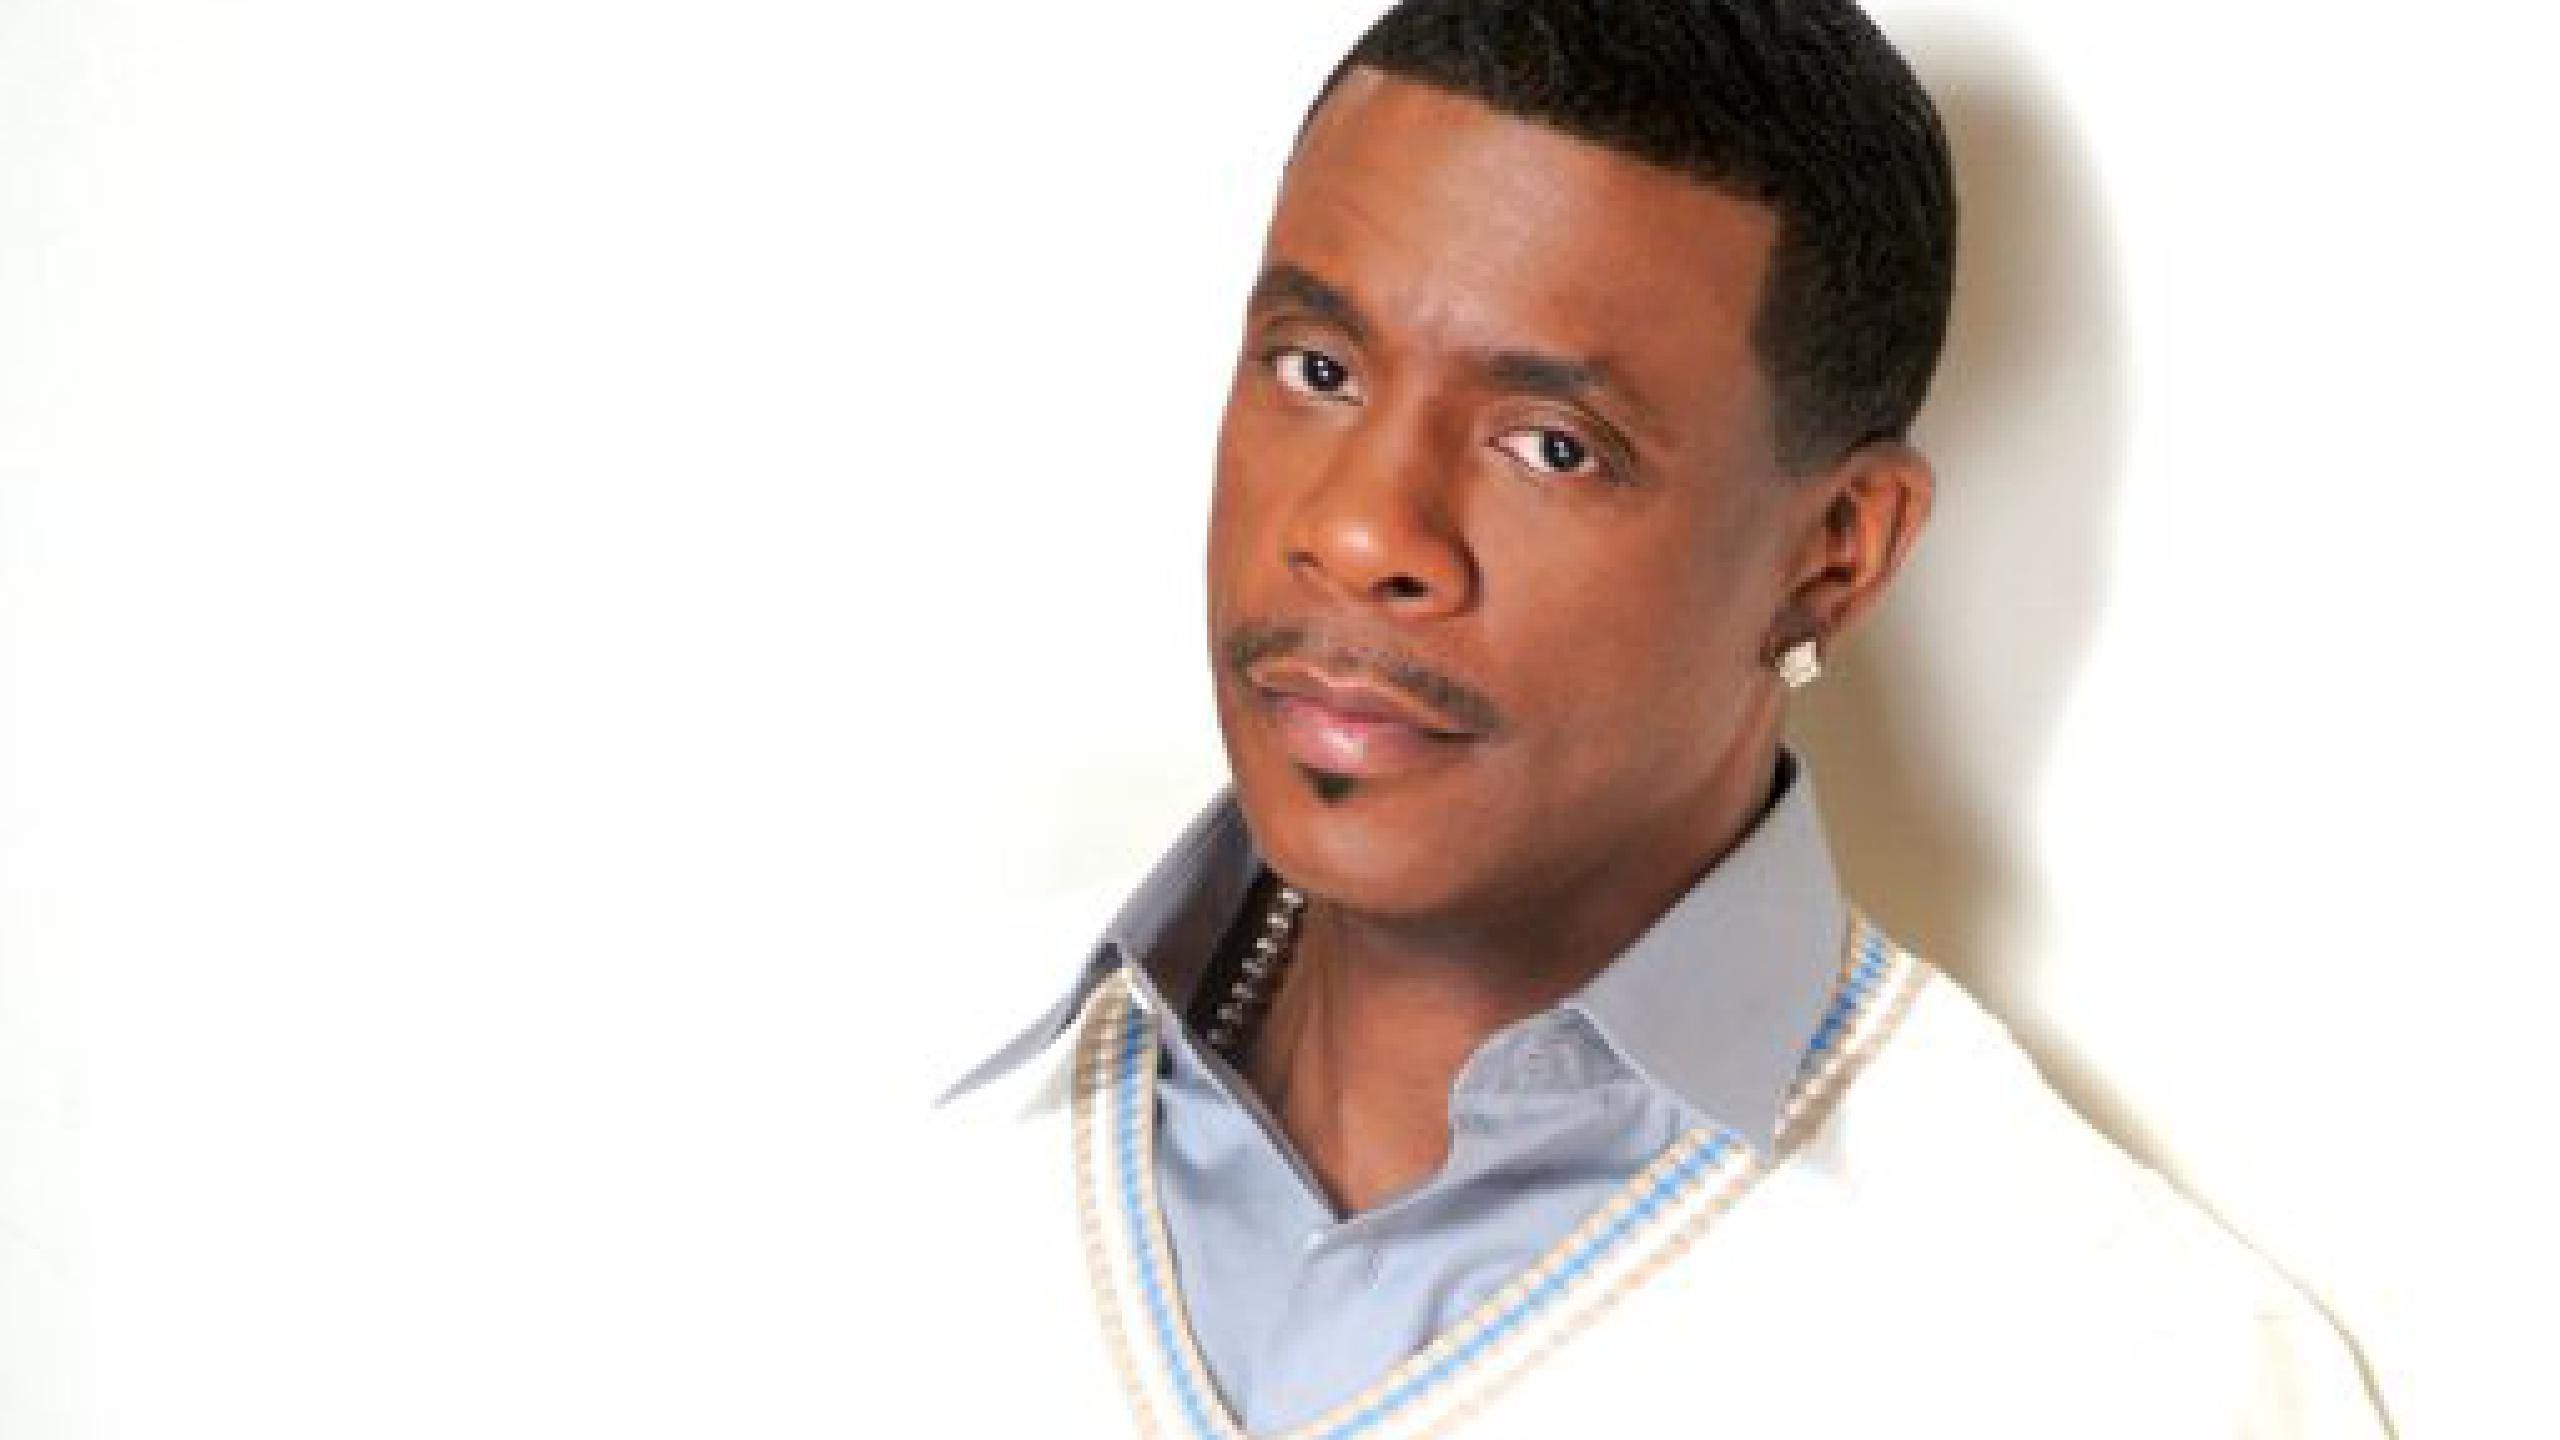 Keith Sweat tour dates 2020 2021. Keith Sweat tickets and concerts